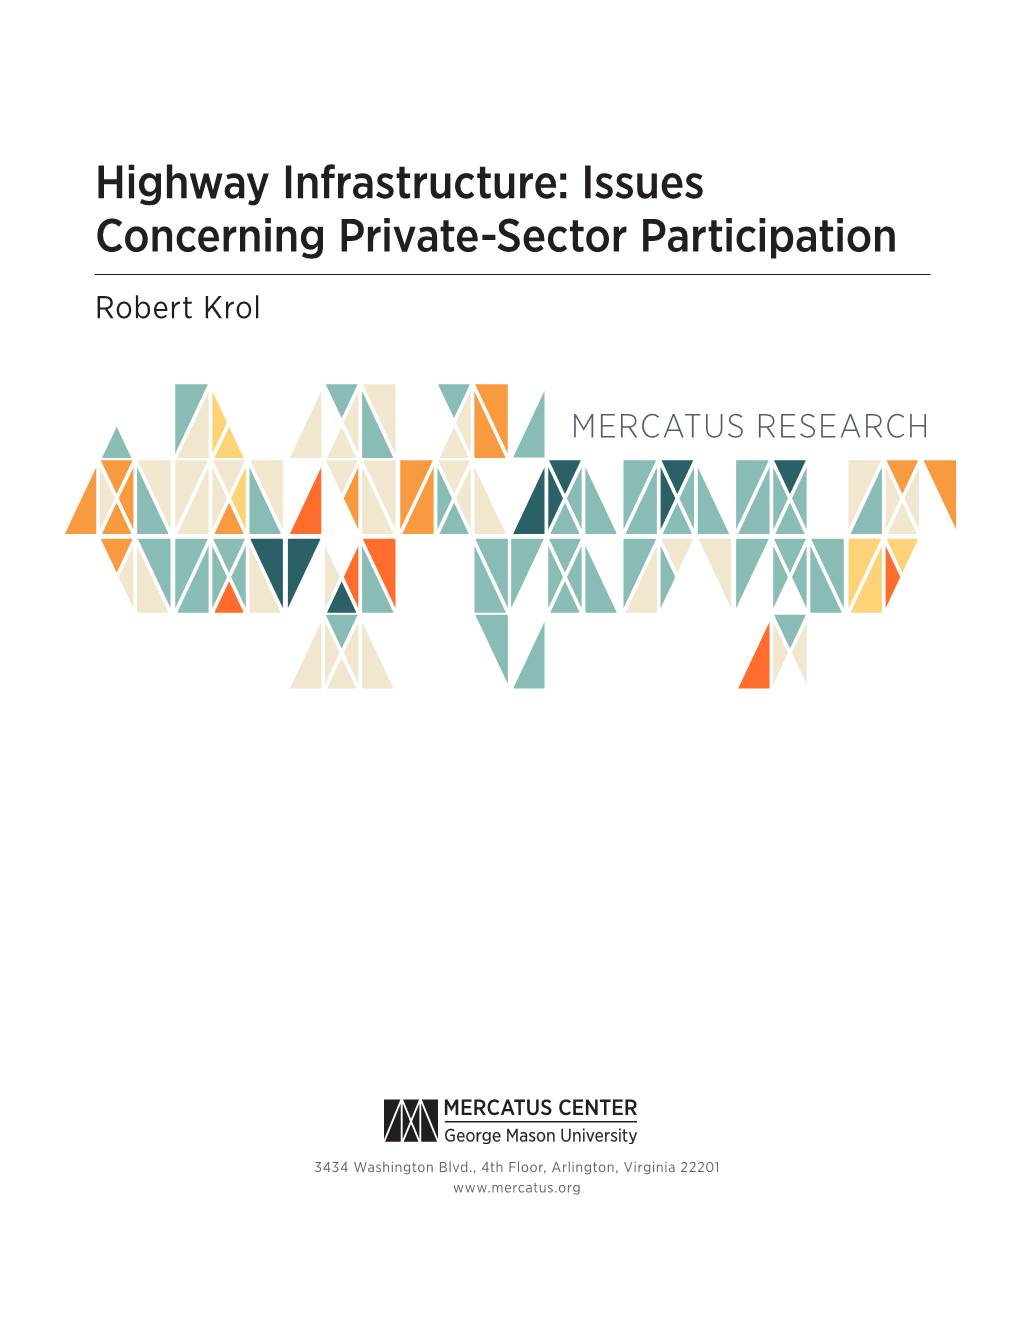 Highway Infrastructure: Issues Concerning Private-Sector Participation